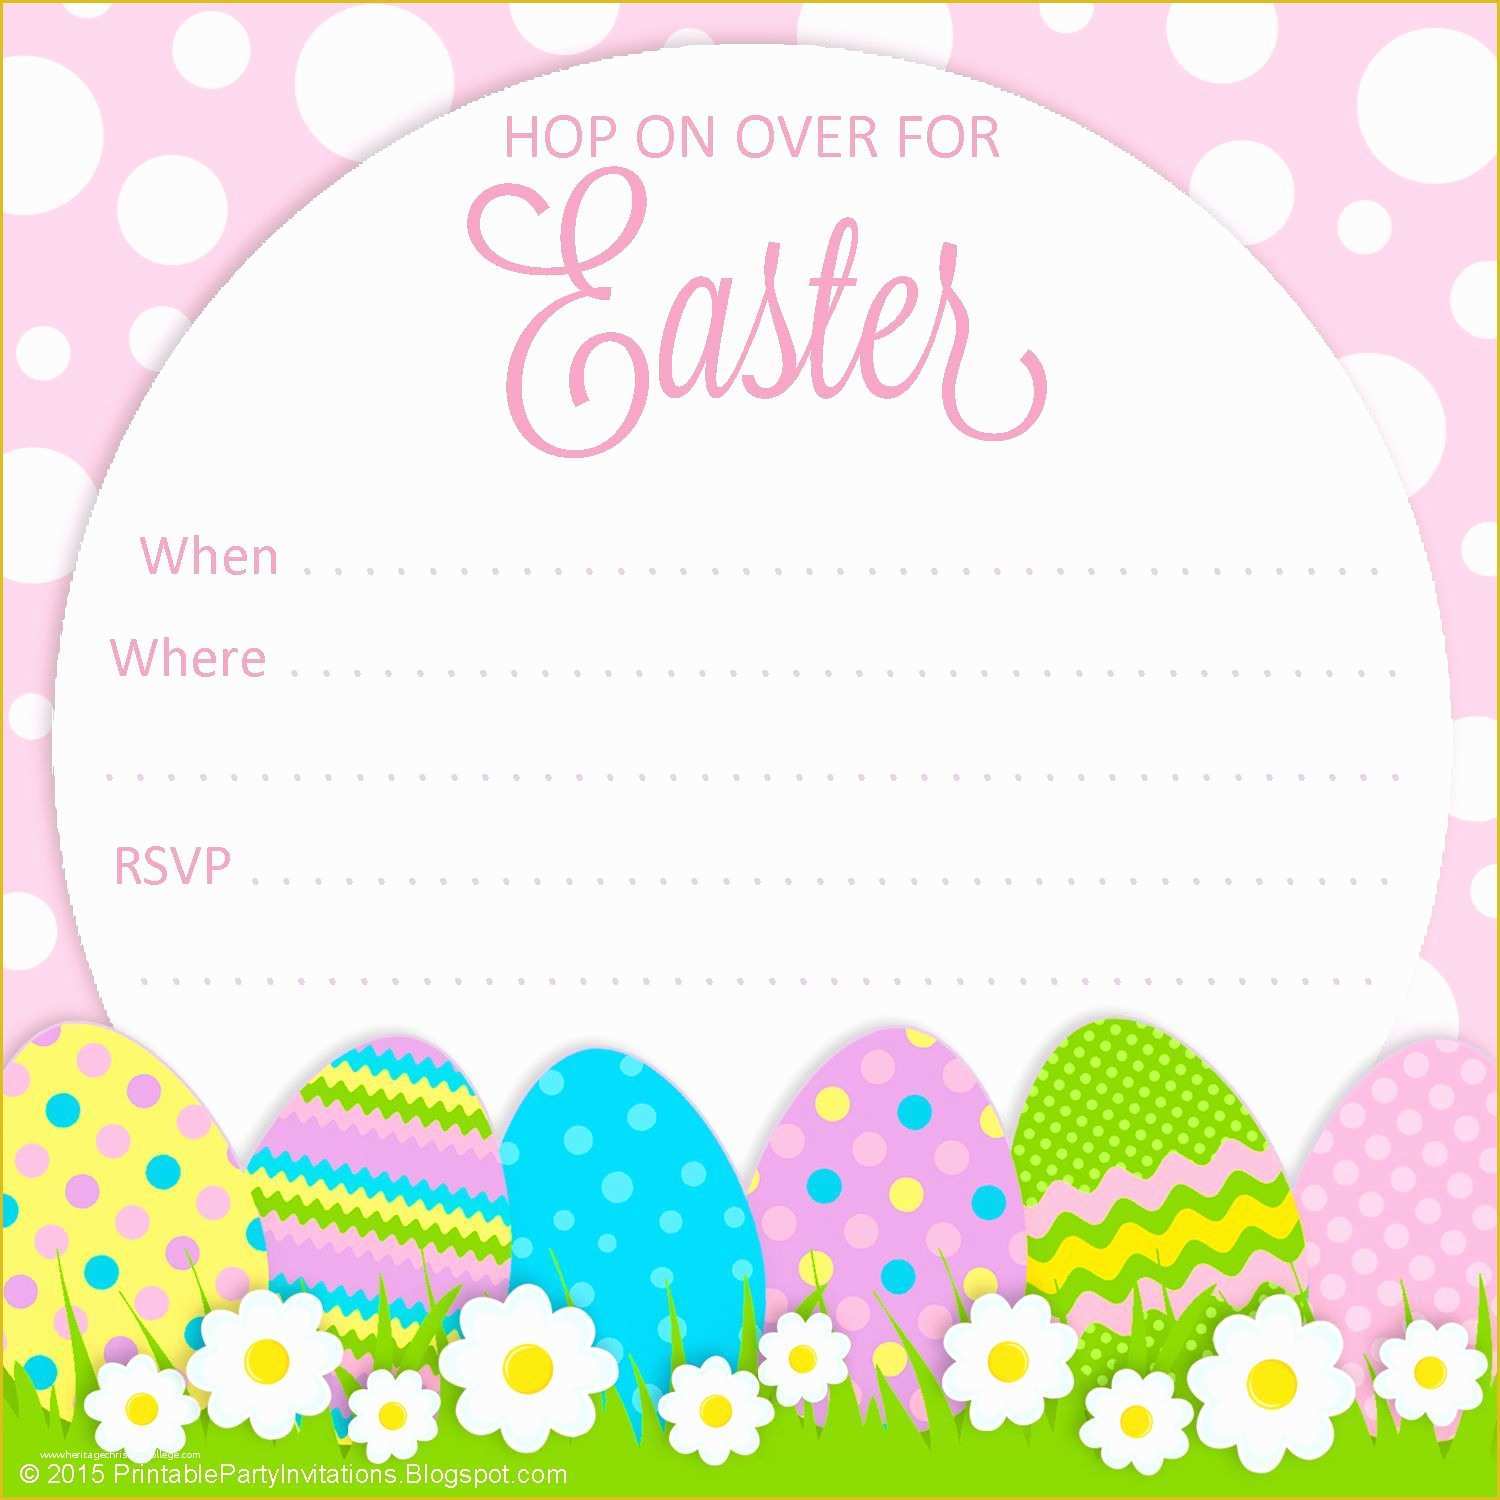 Spring Party Invitation Templates Free Of Free Easter Party Invitation for Easter Egg Hunts or